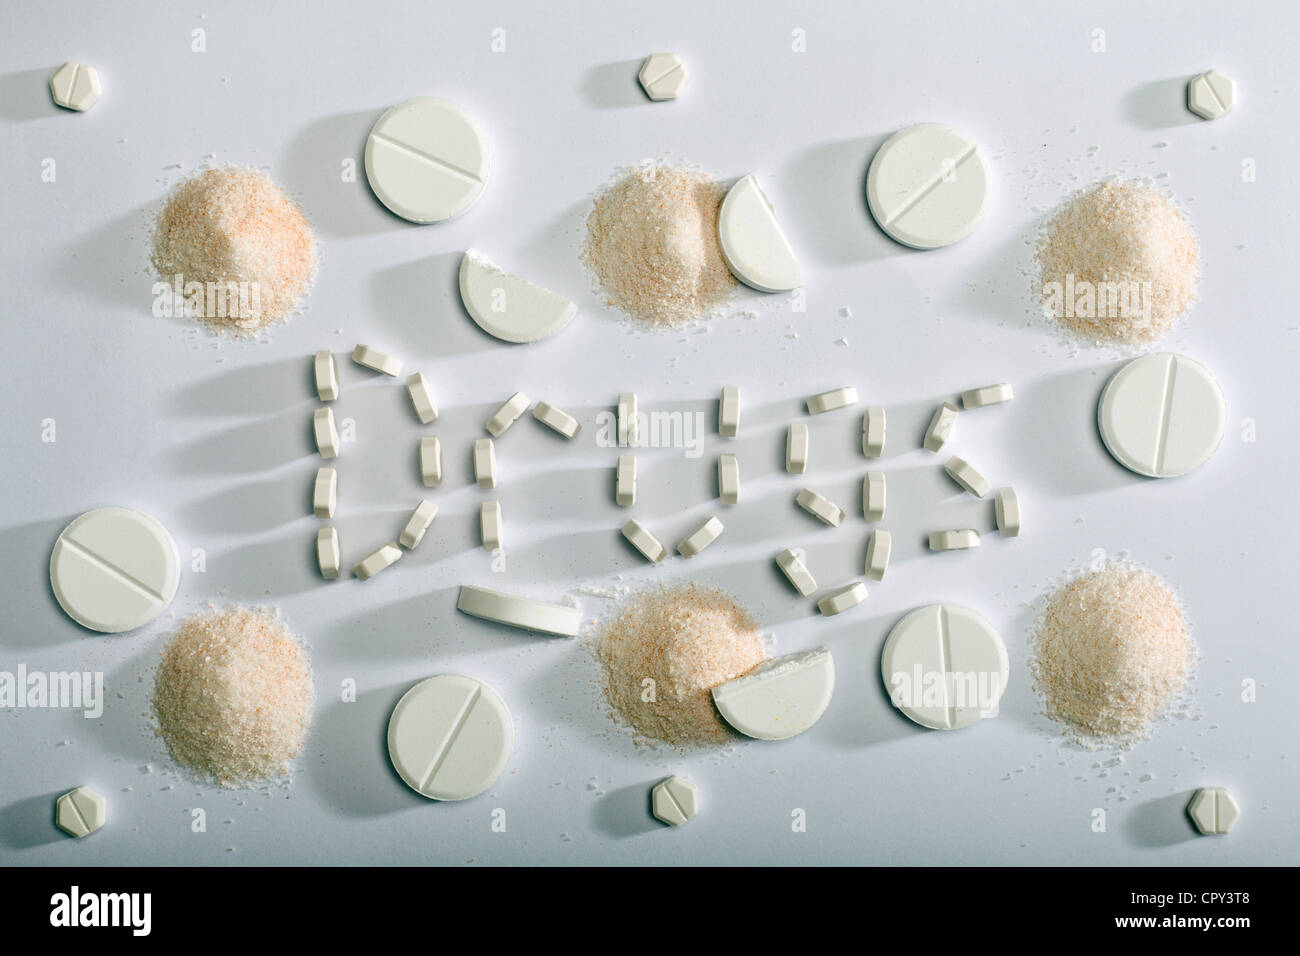 Pills and powders used to spell the word drugs. Stock Photo